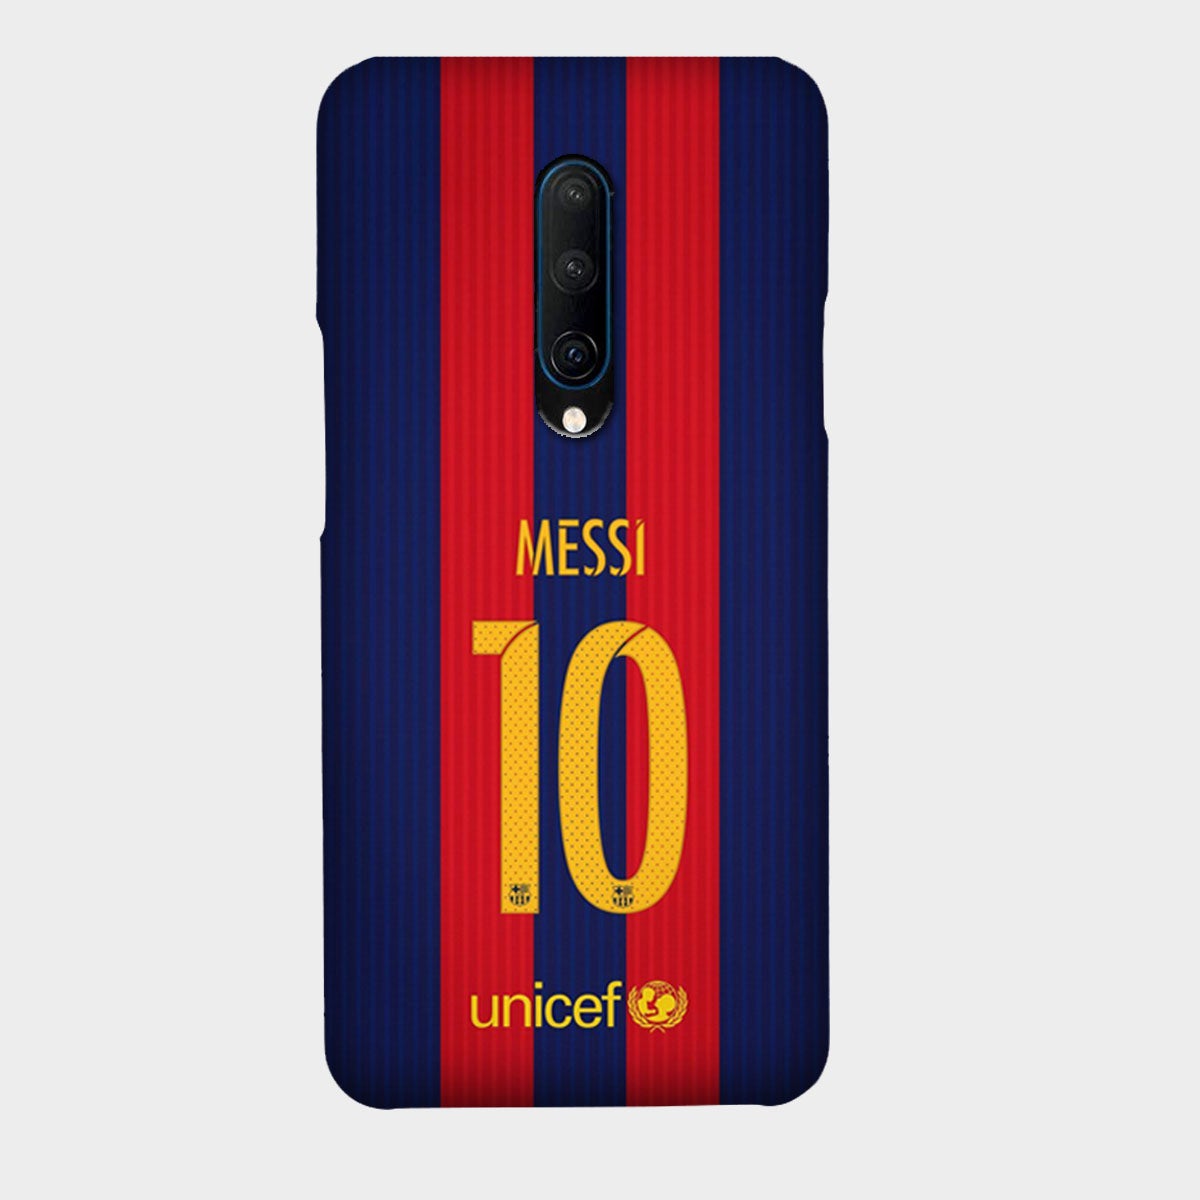 Lionel Messi Shirt - FC Barcelona - Mobile Phone Cover - Hard Case - OnePlus